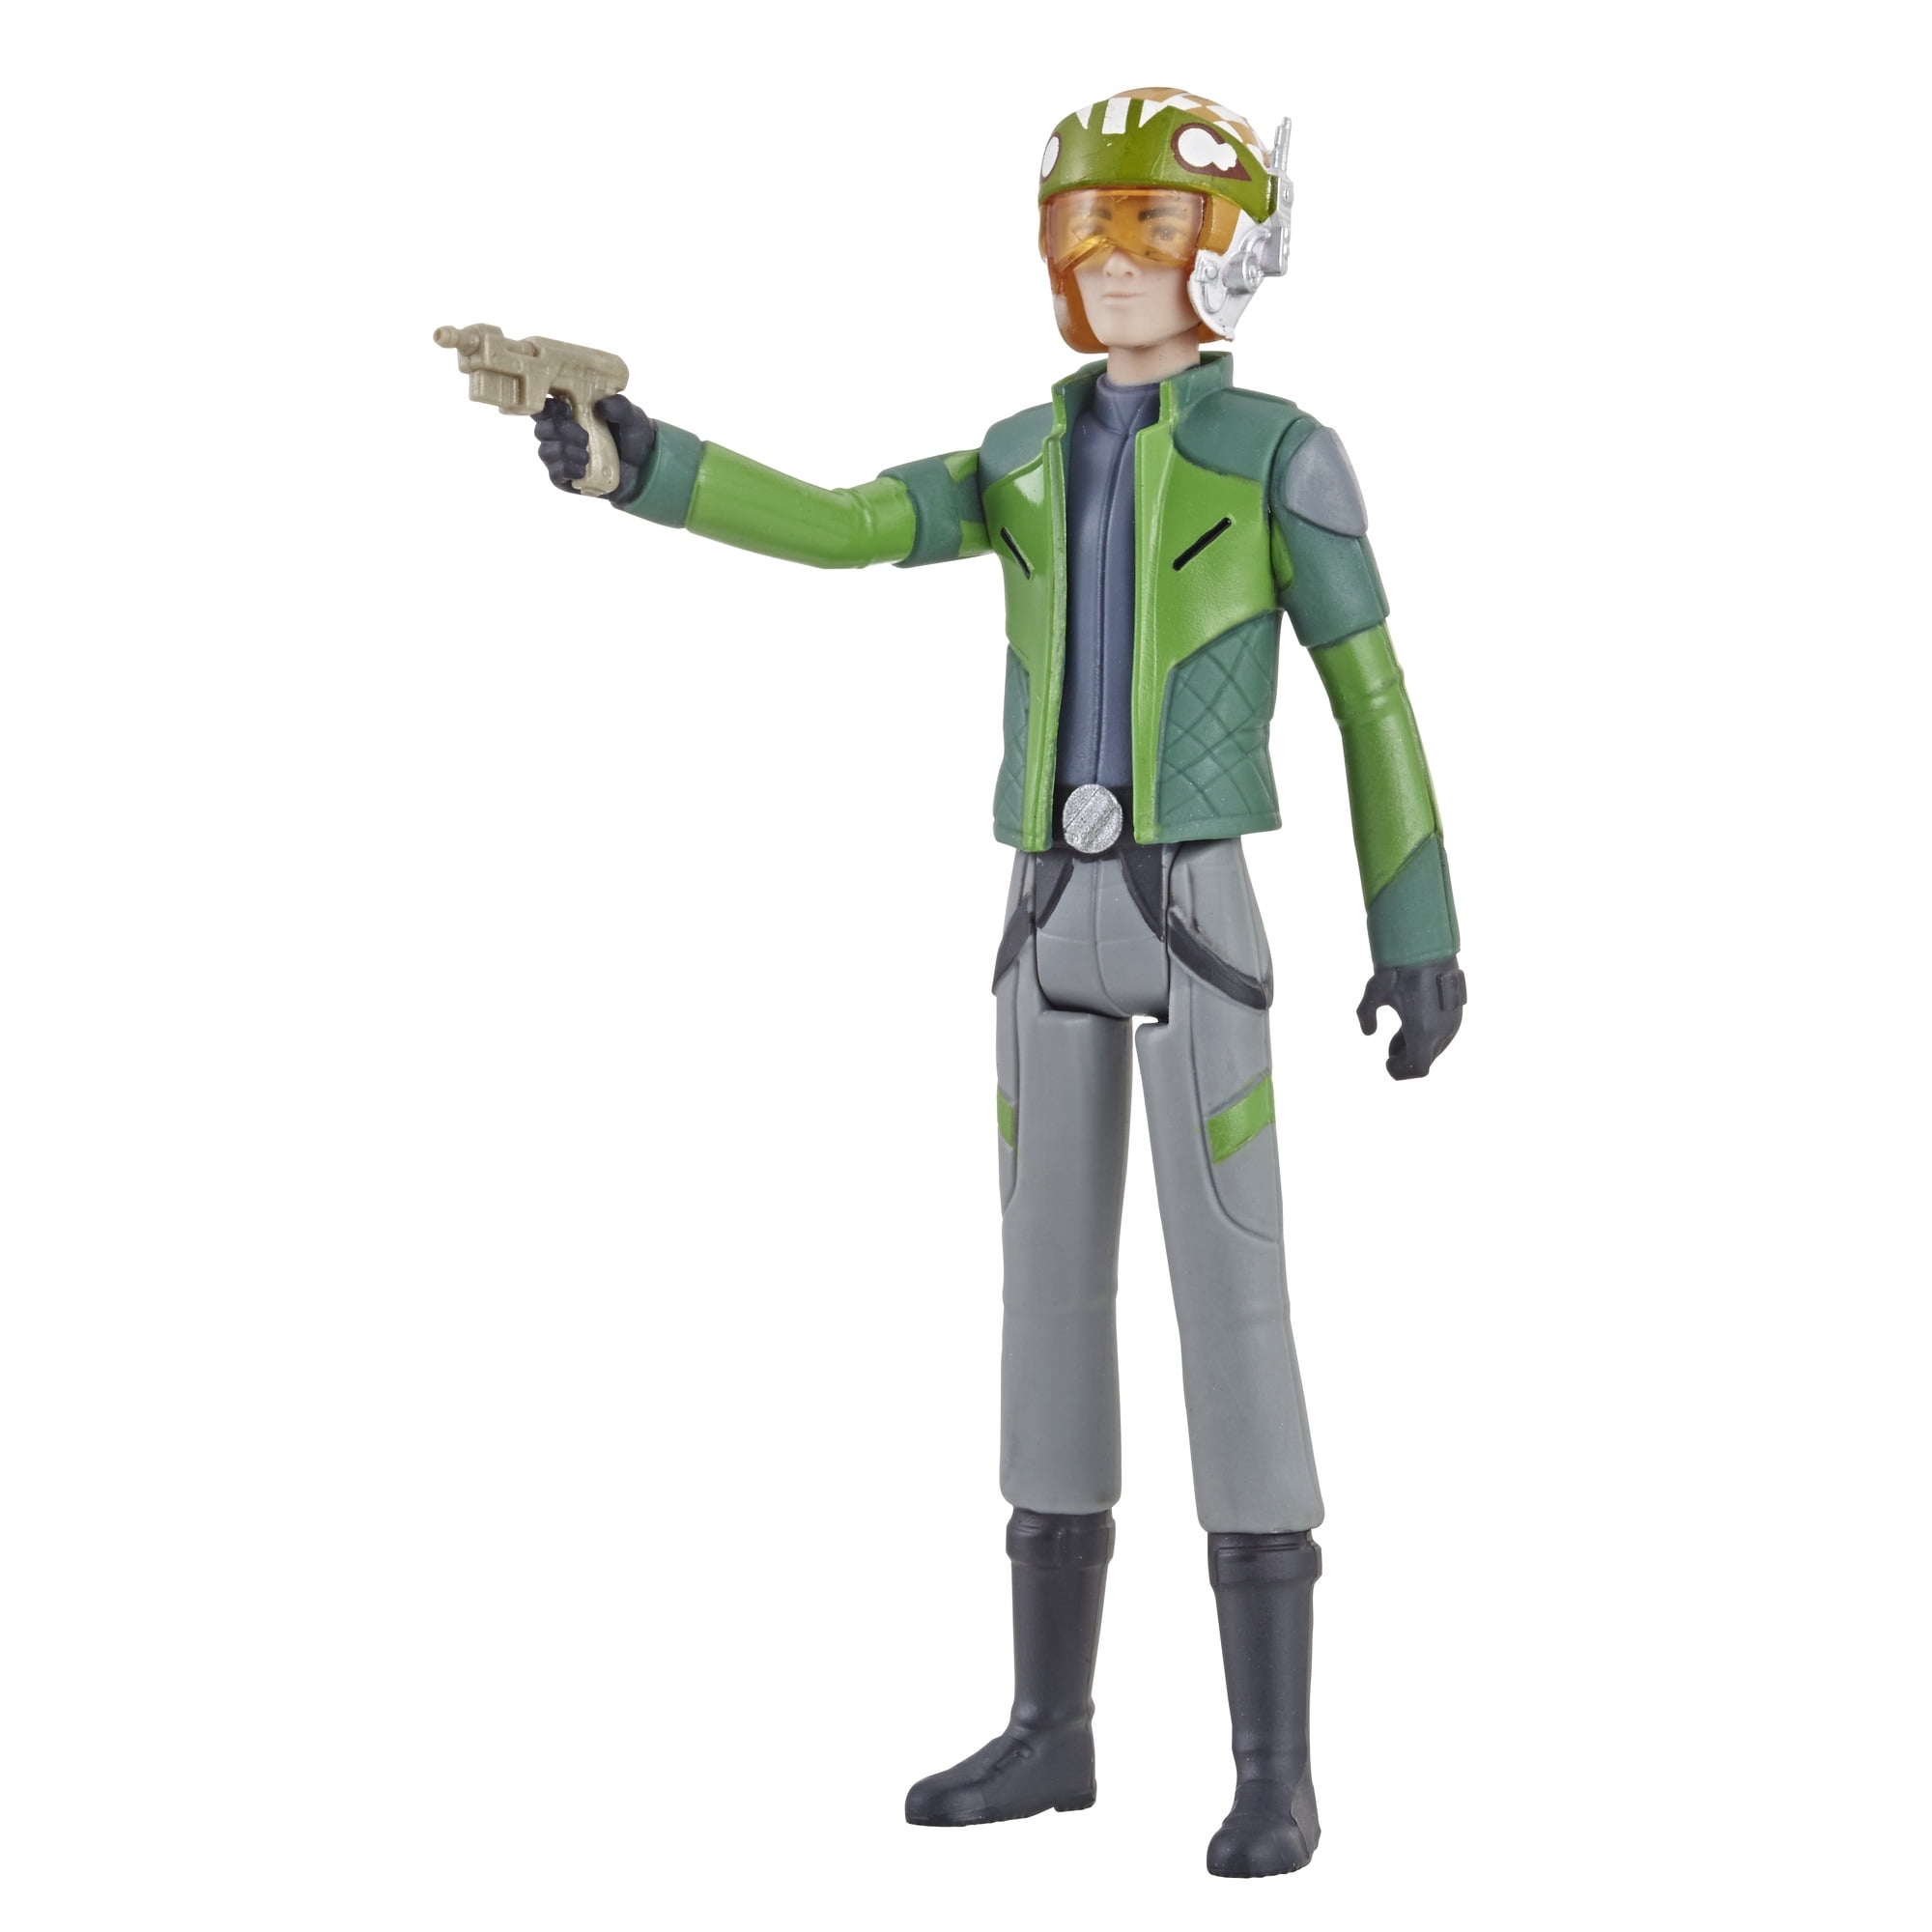 Hasbro Star Wars Resistance Animated Series 3.75-inch Synara San Action Figure for sale online 